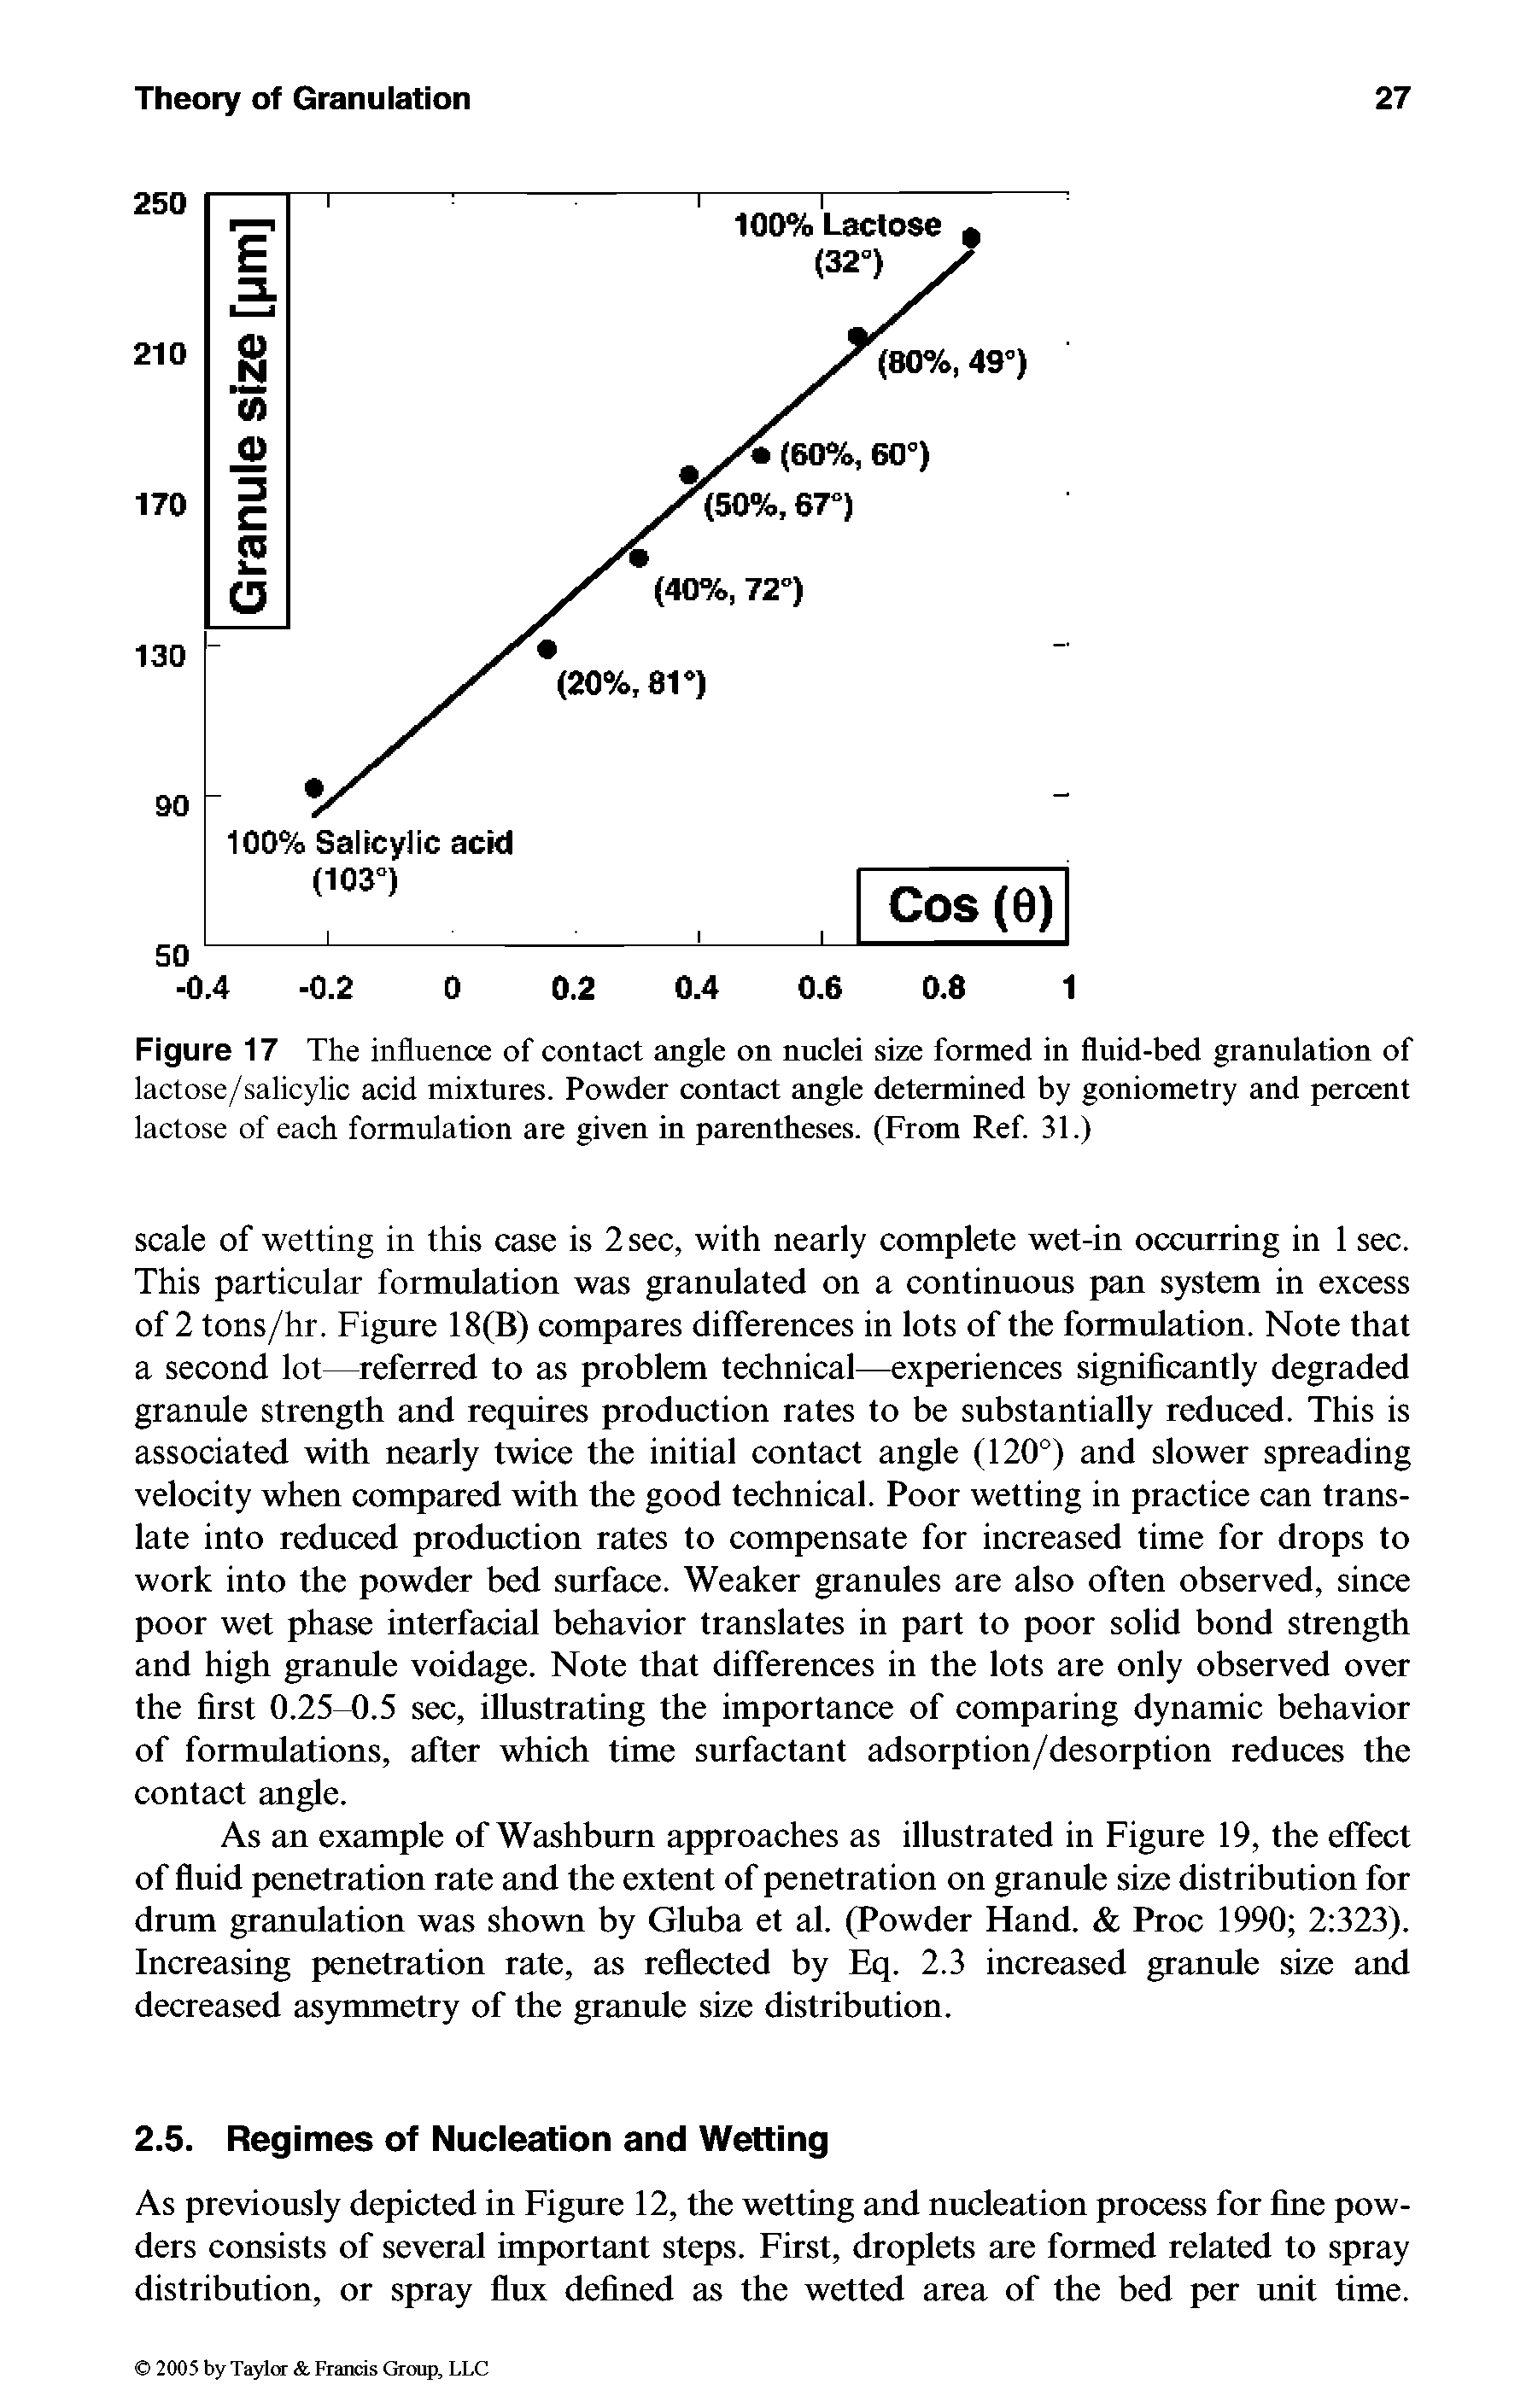 Figure 17 The influence of contact angle on nuclei size formed in fluid-bed granulation of lactose/salicylic acid mixtures. Powder contact angle determined by goniometry and percent lactose of each formulation are given in parentheses. (From Ref. 31.)...